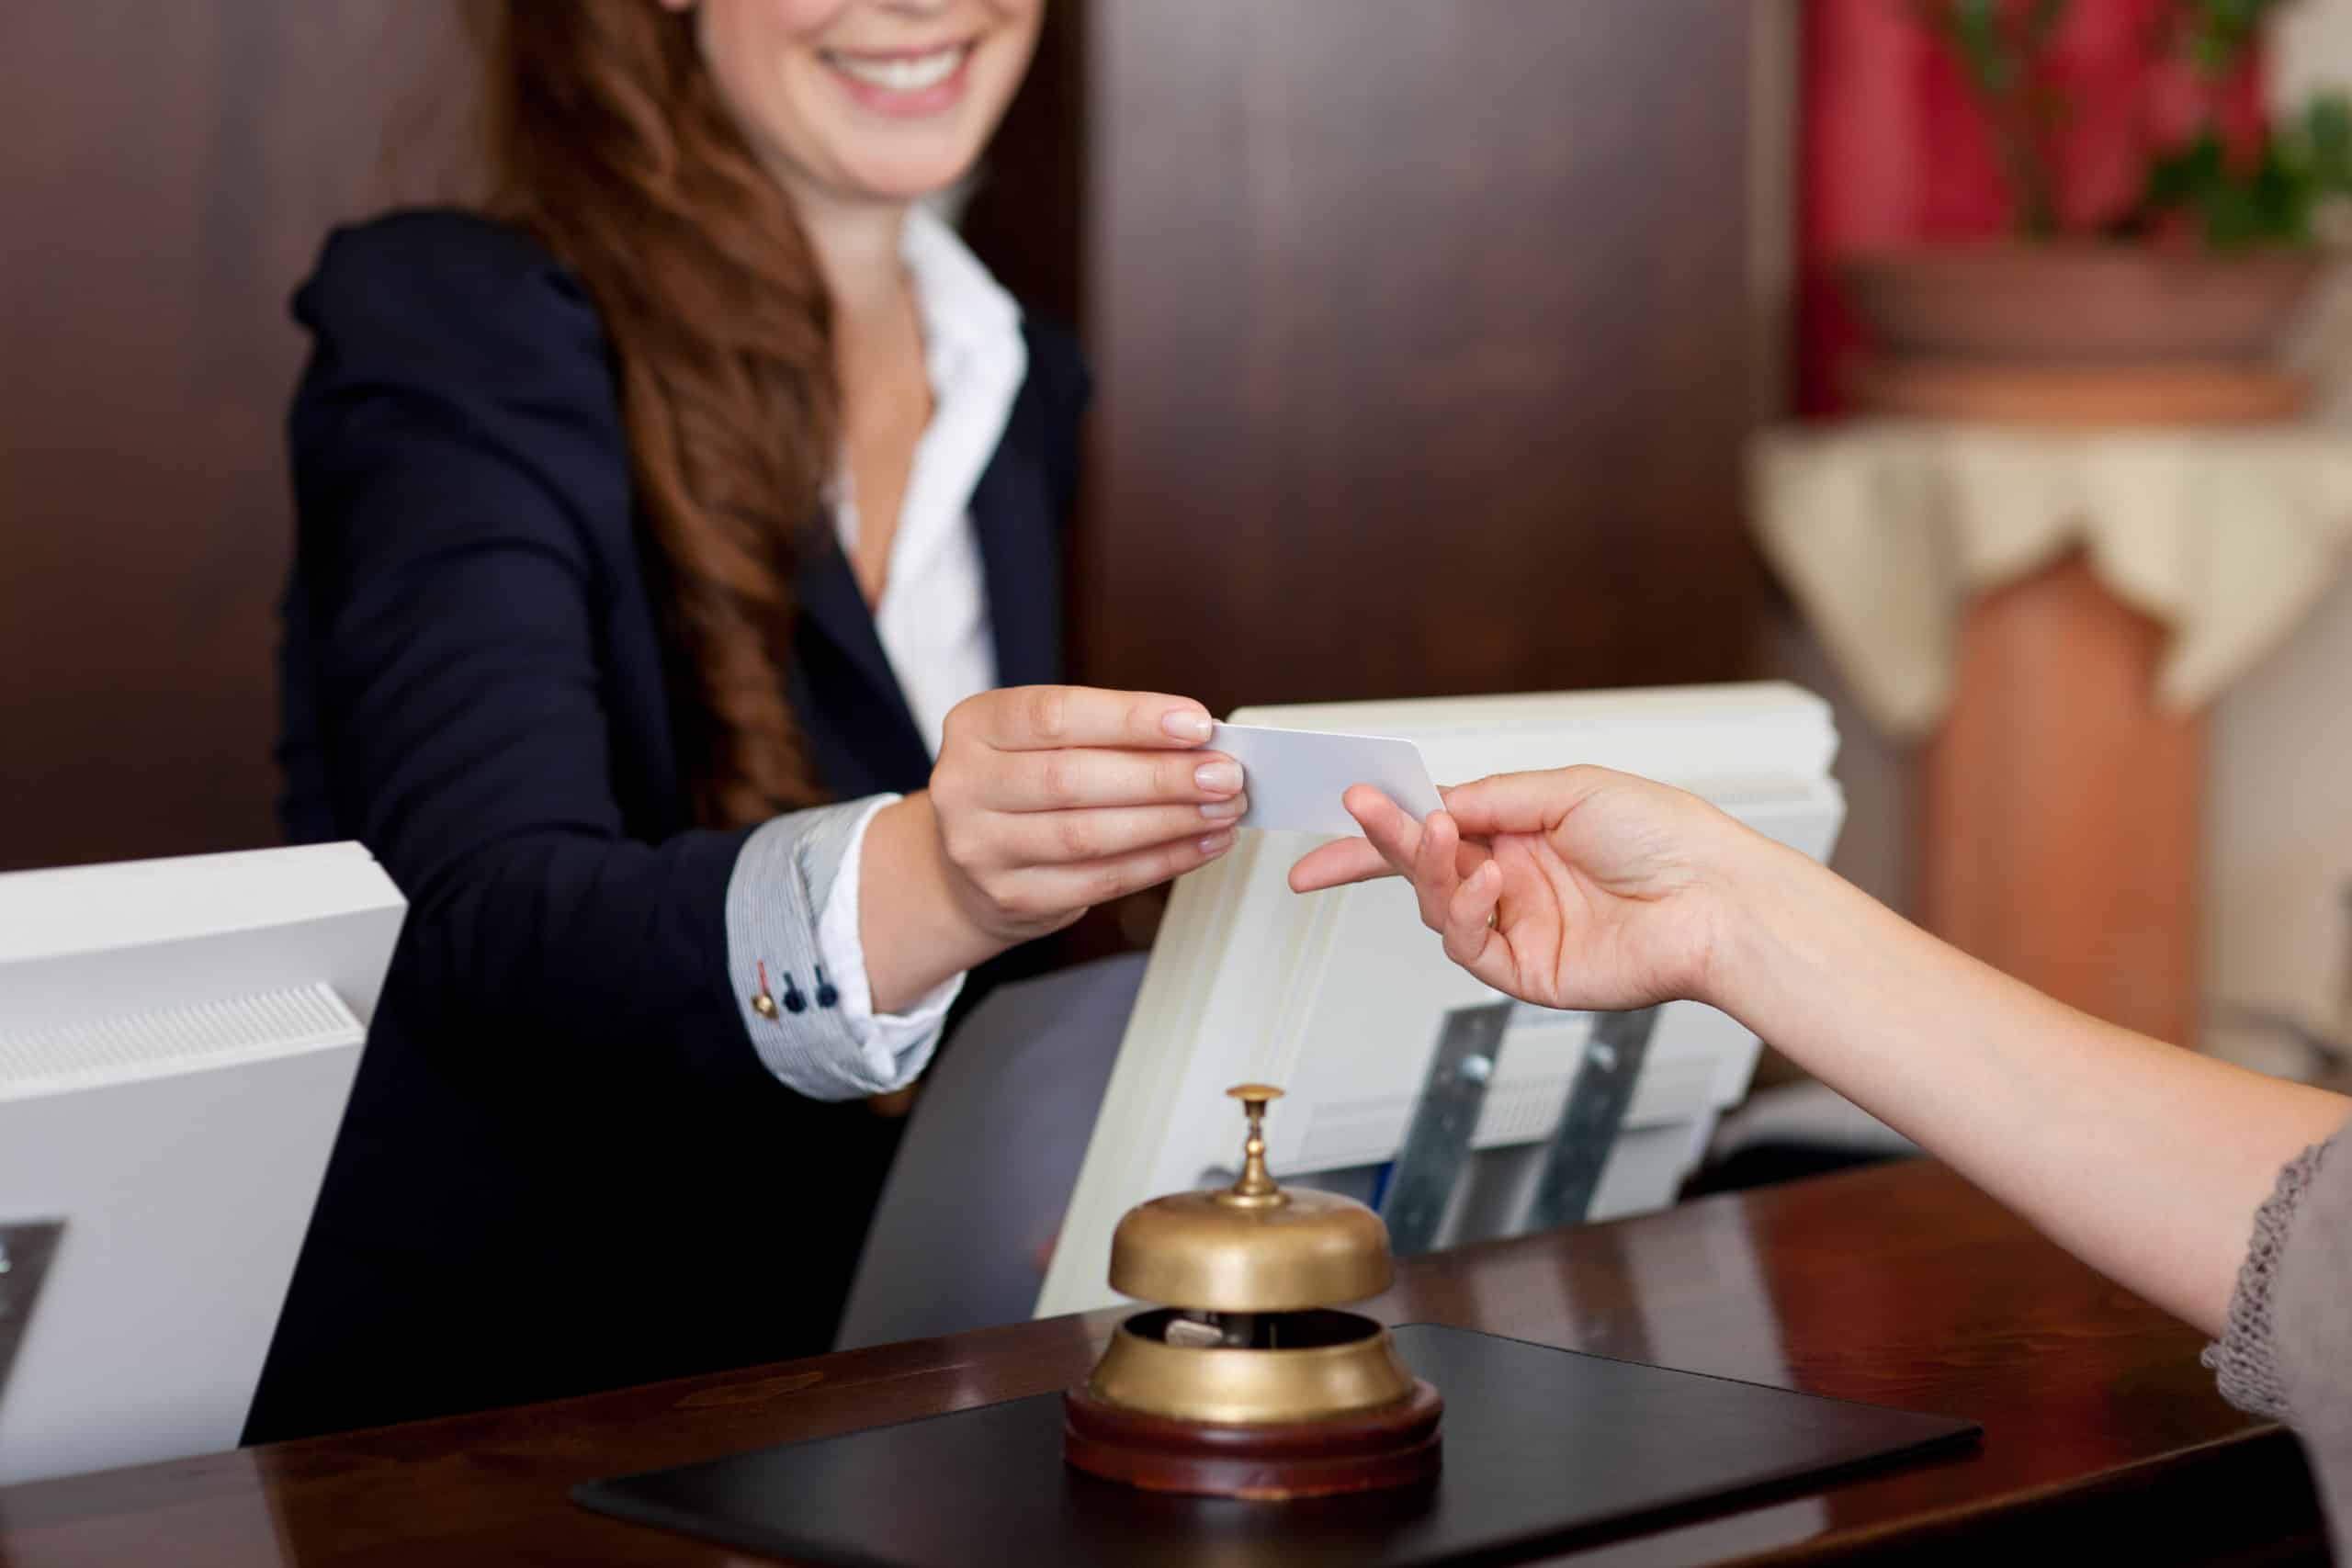 A hotel receptionist hands a keycard to a guest.